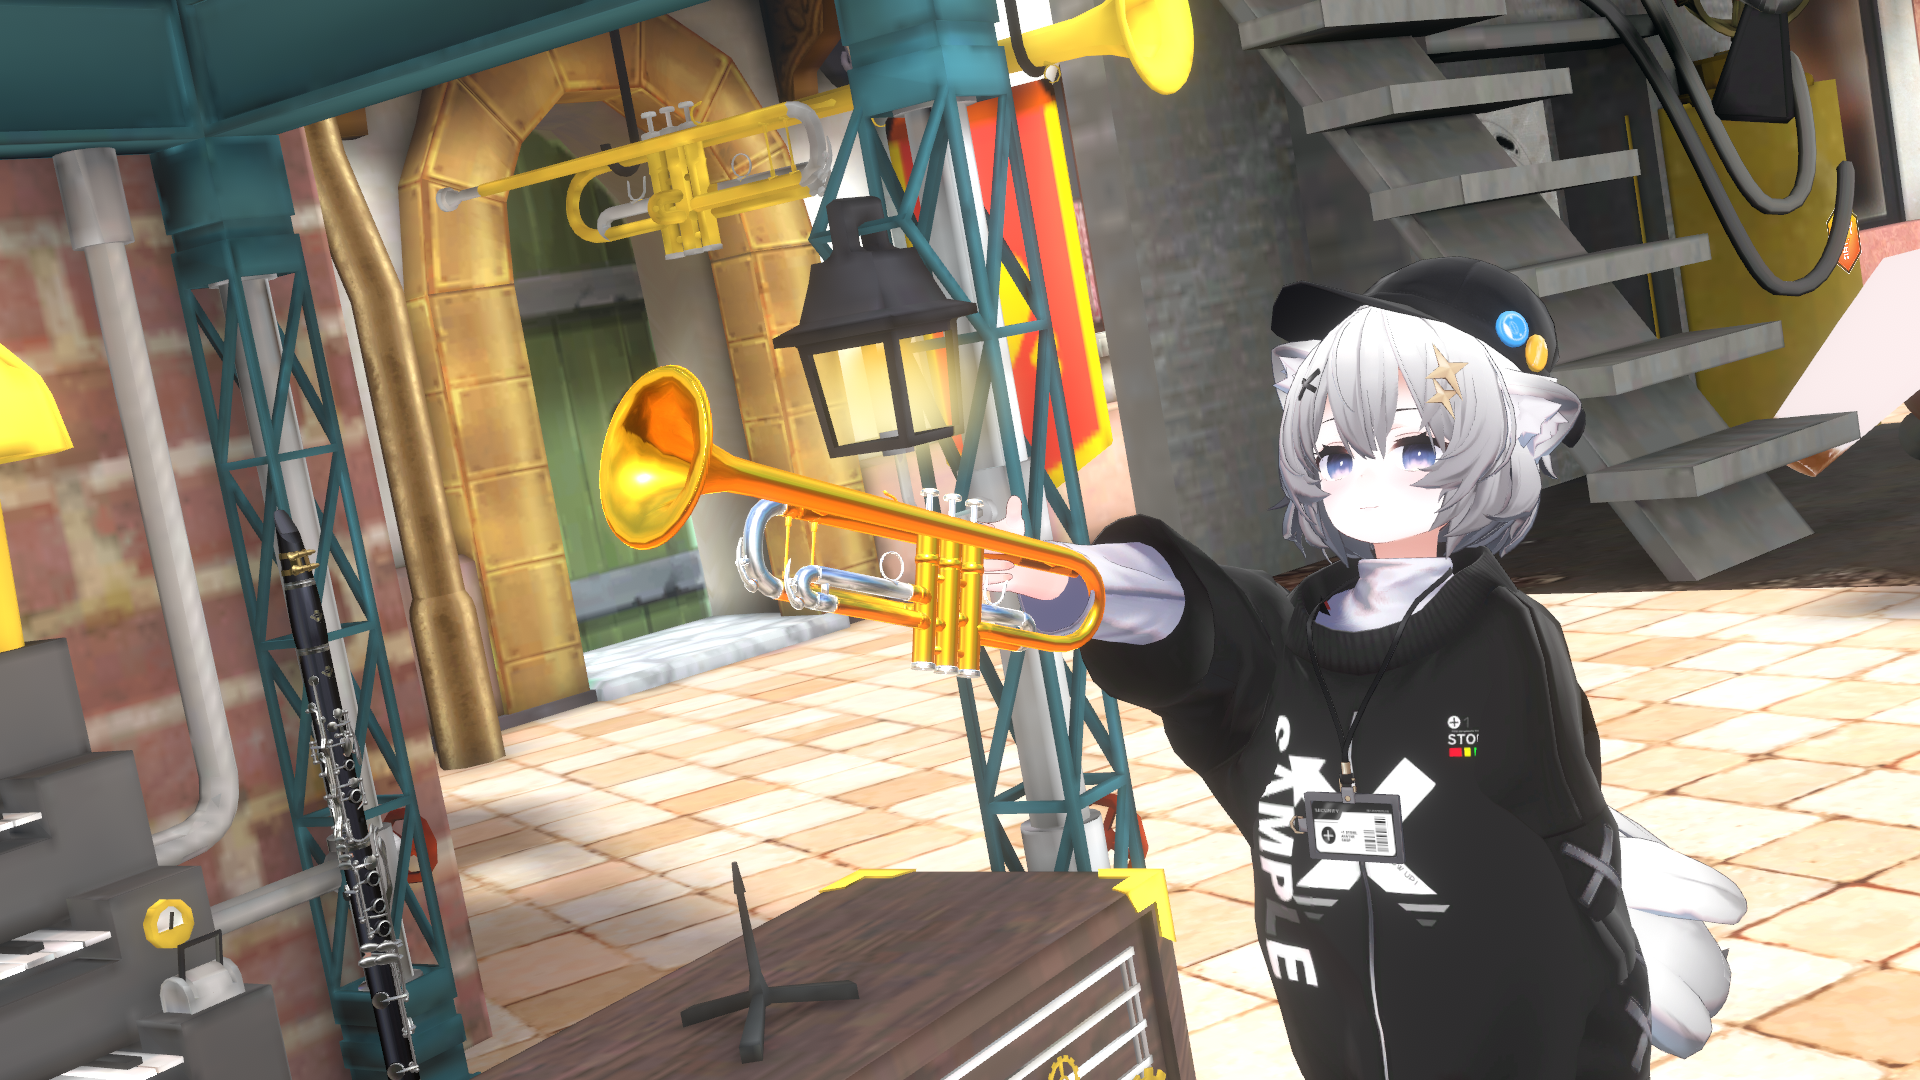 VRChat_1920x1080_2021-12-05_03-08-50.113.png